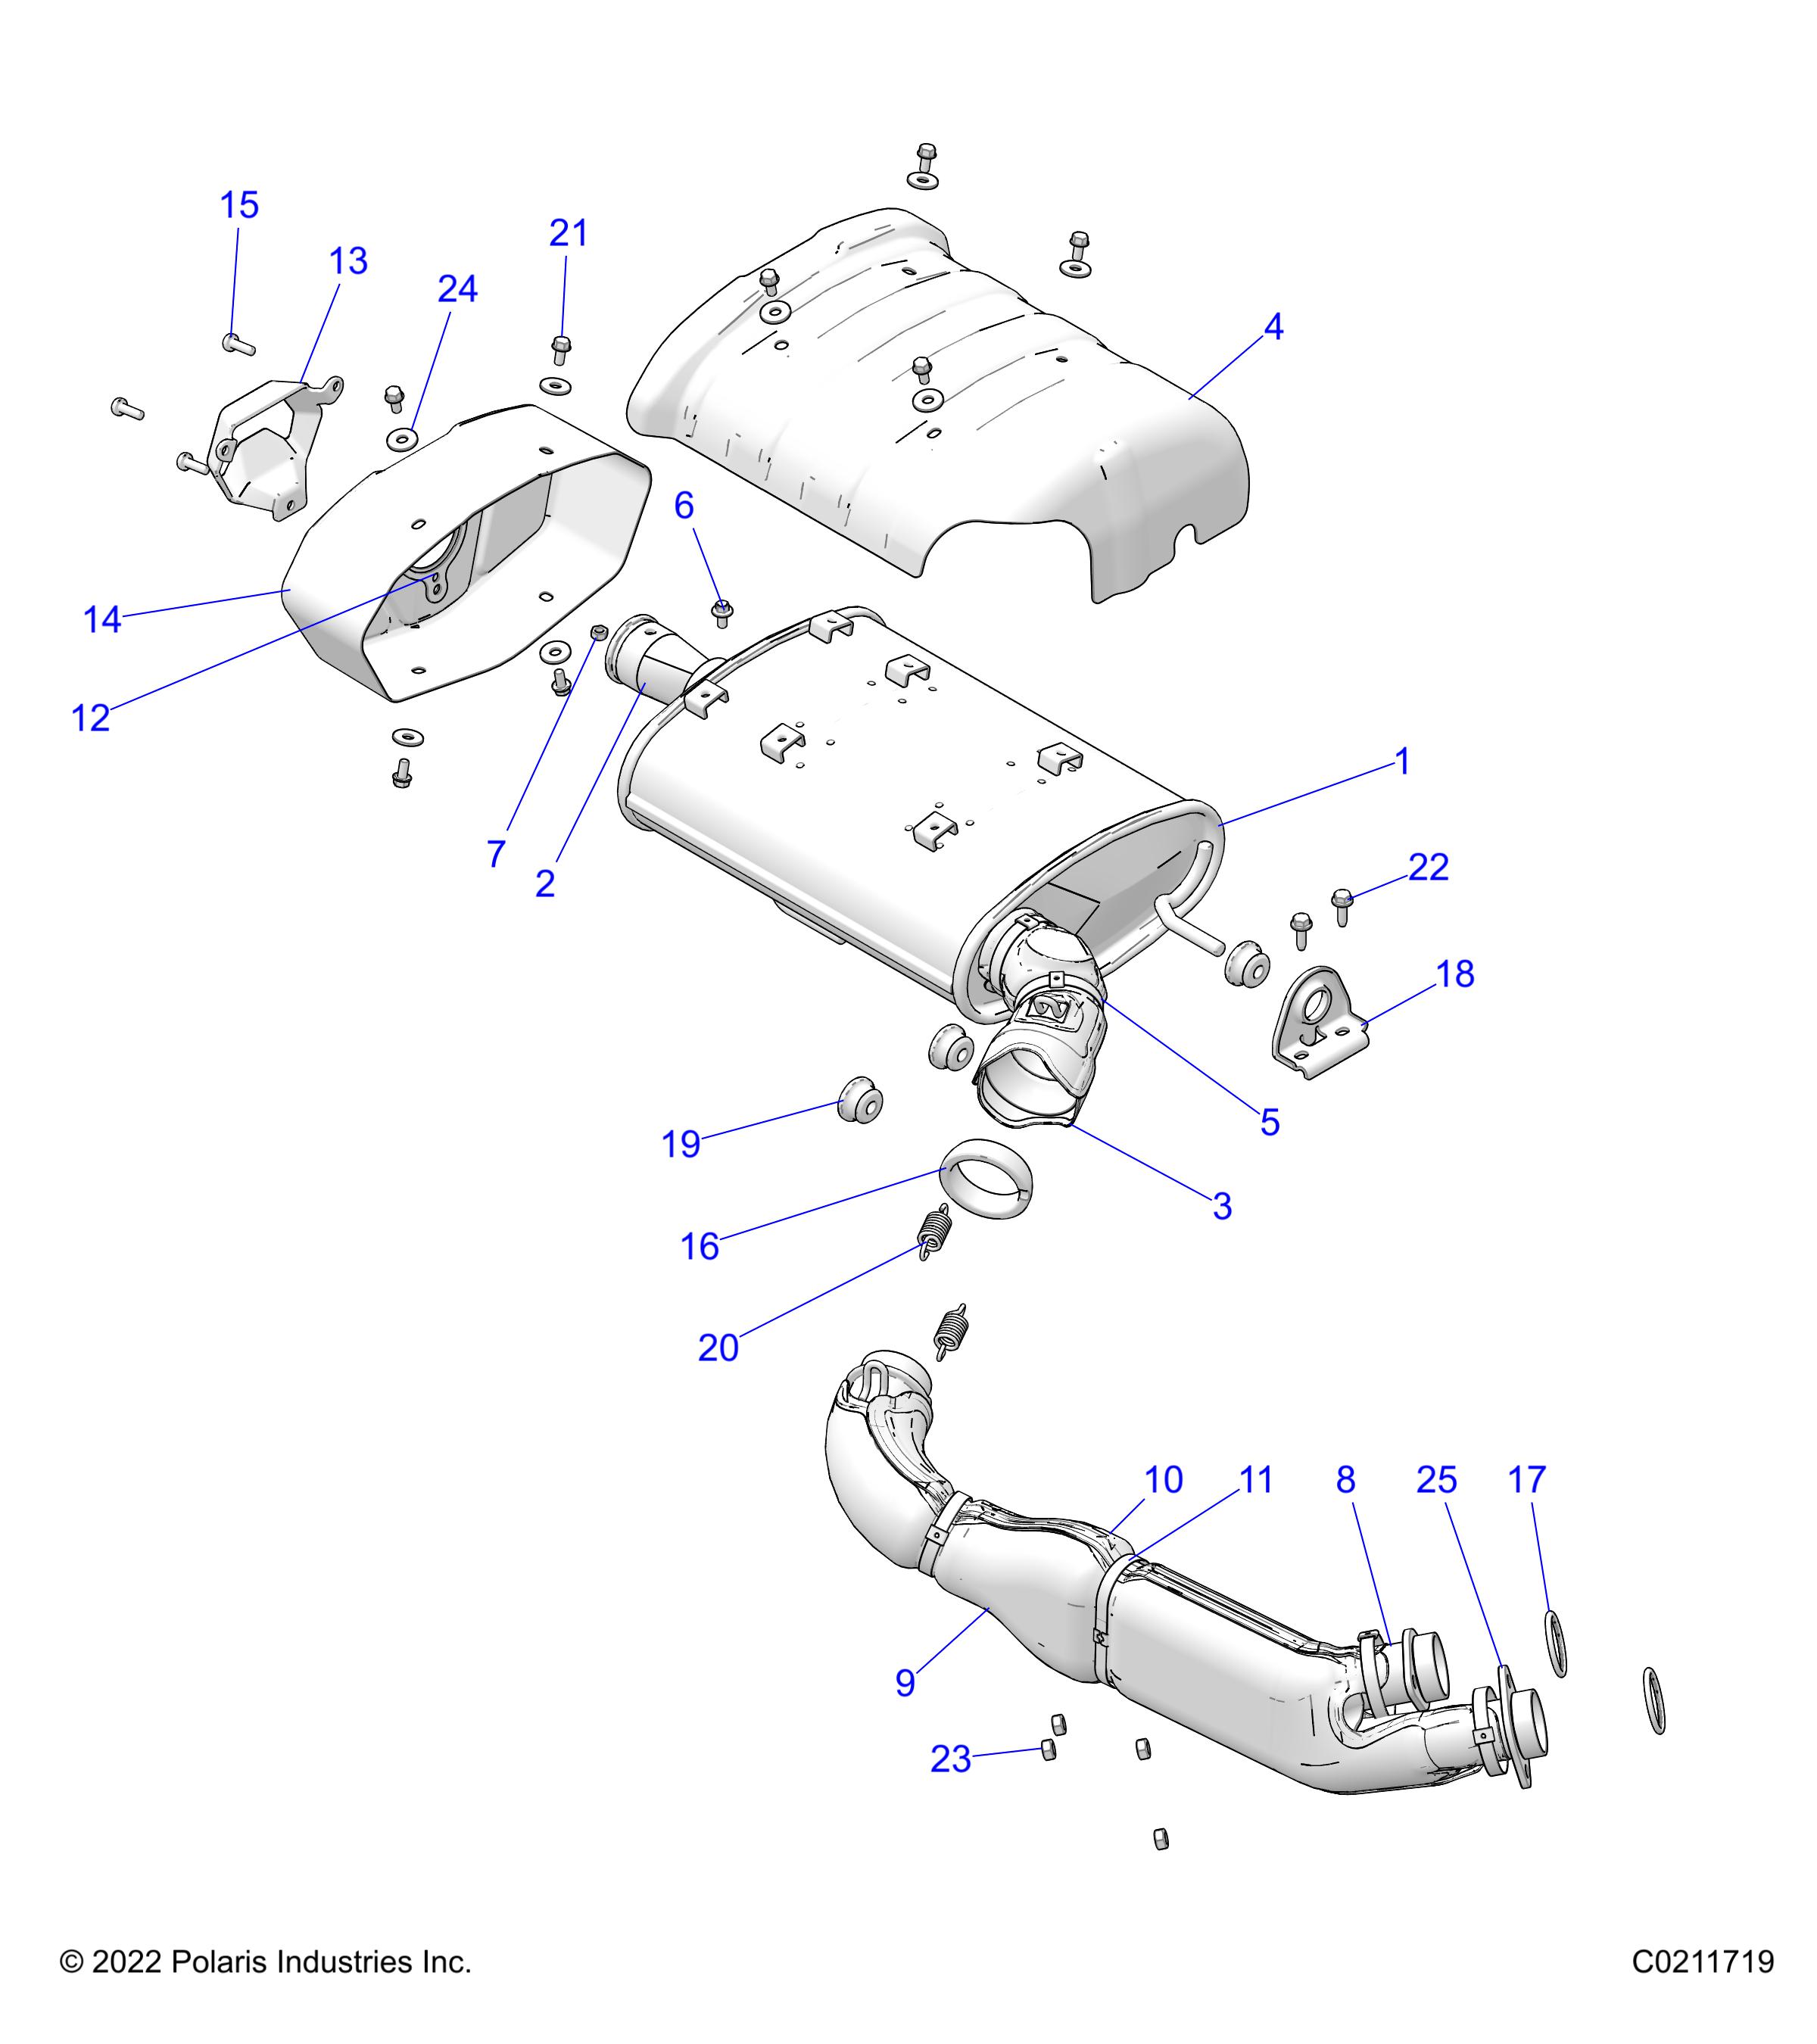 Part Number : 1263197 ASM-EXHAUST PIPE 1000